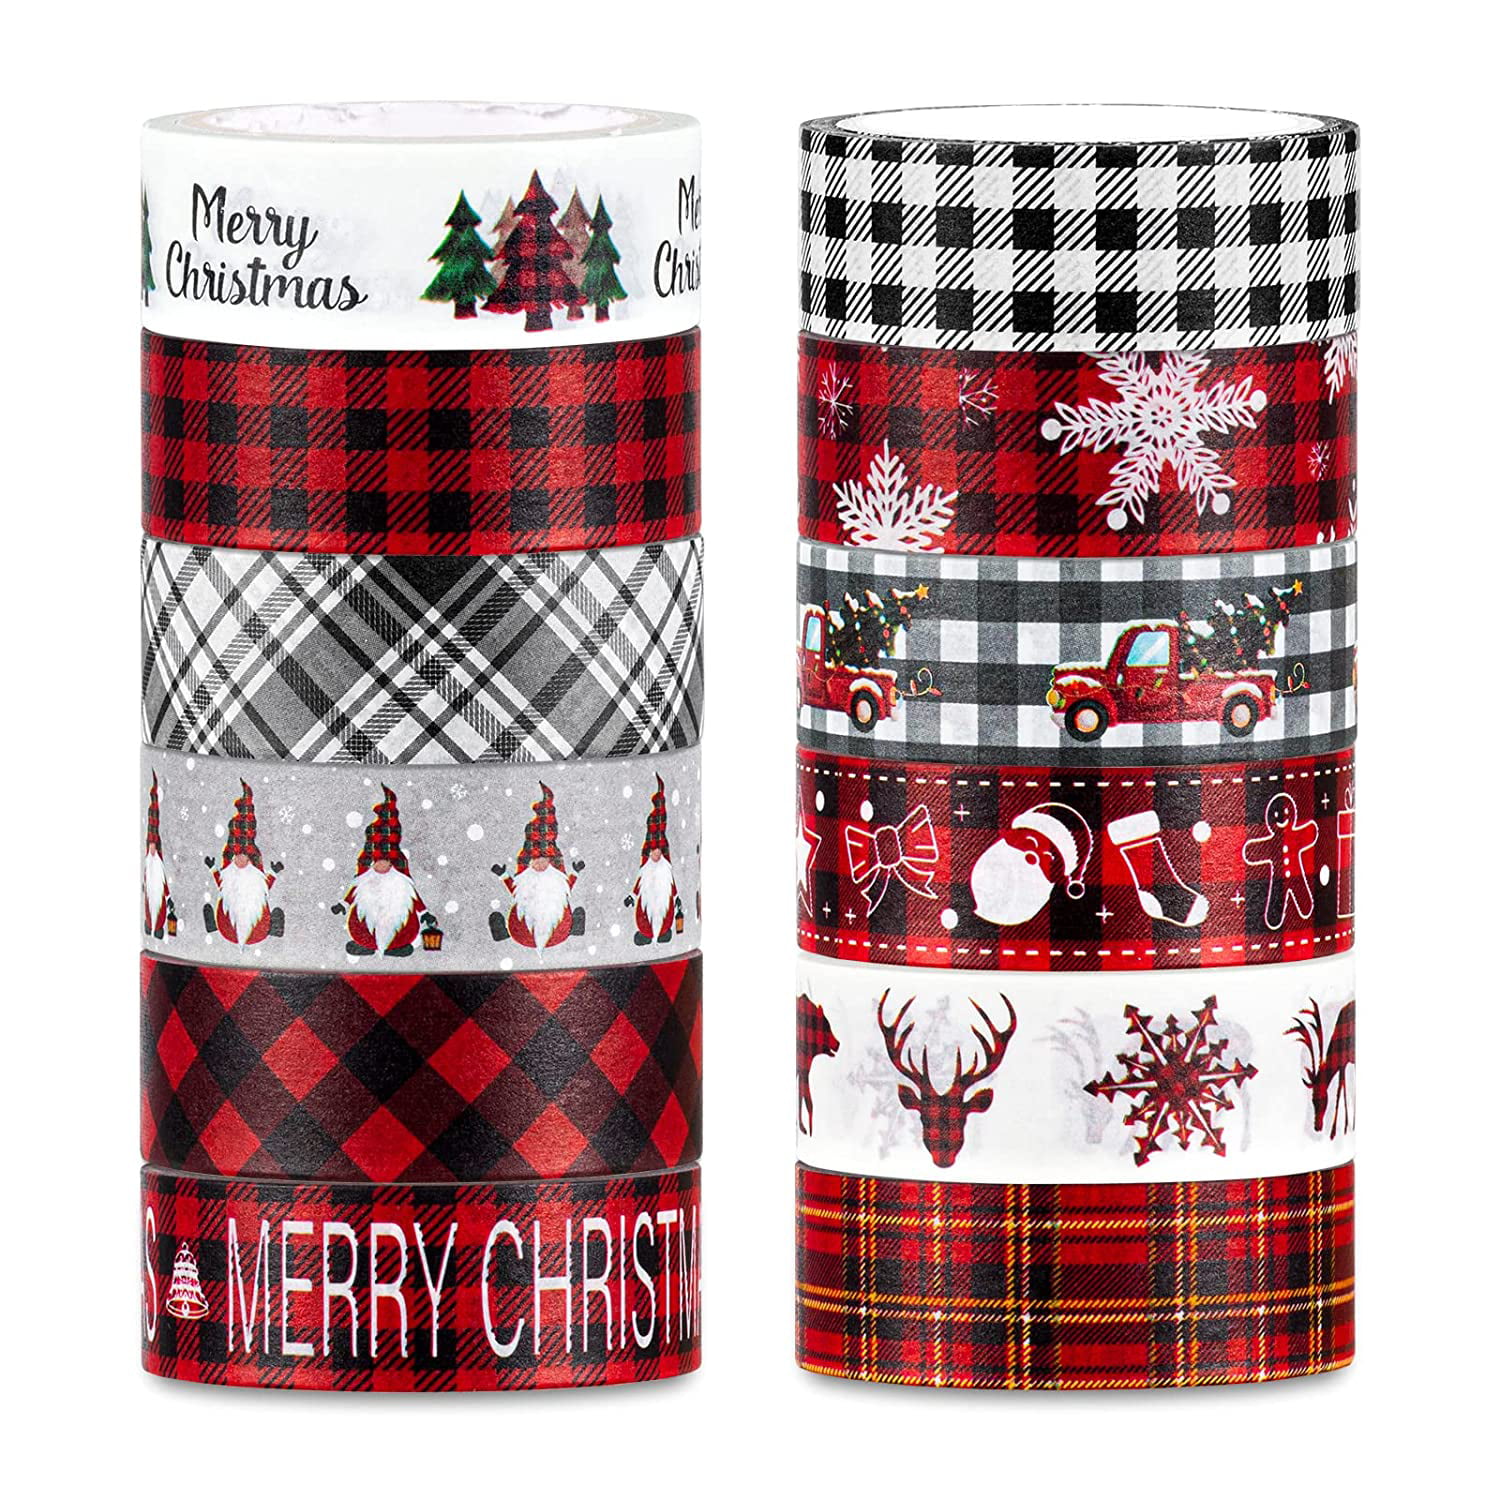 Whaline 12 Roll Christmas Plaid Washi Tape Red Black White Buffalo Check Holiday Washi Masking Tape Xmas Tree Gnome Snowflake Pattern Decorative Tape for Scrapbook Journal DIY Craft Gift Wrapping